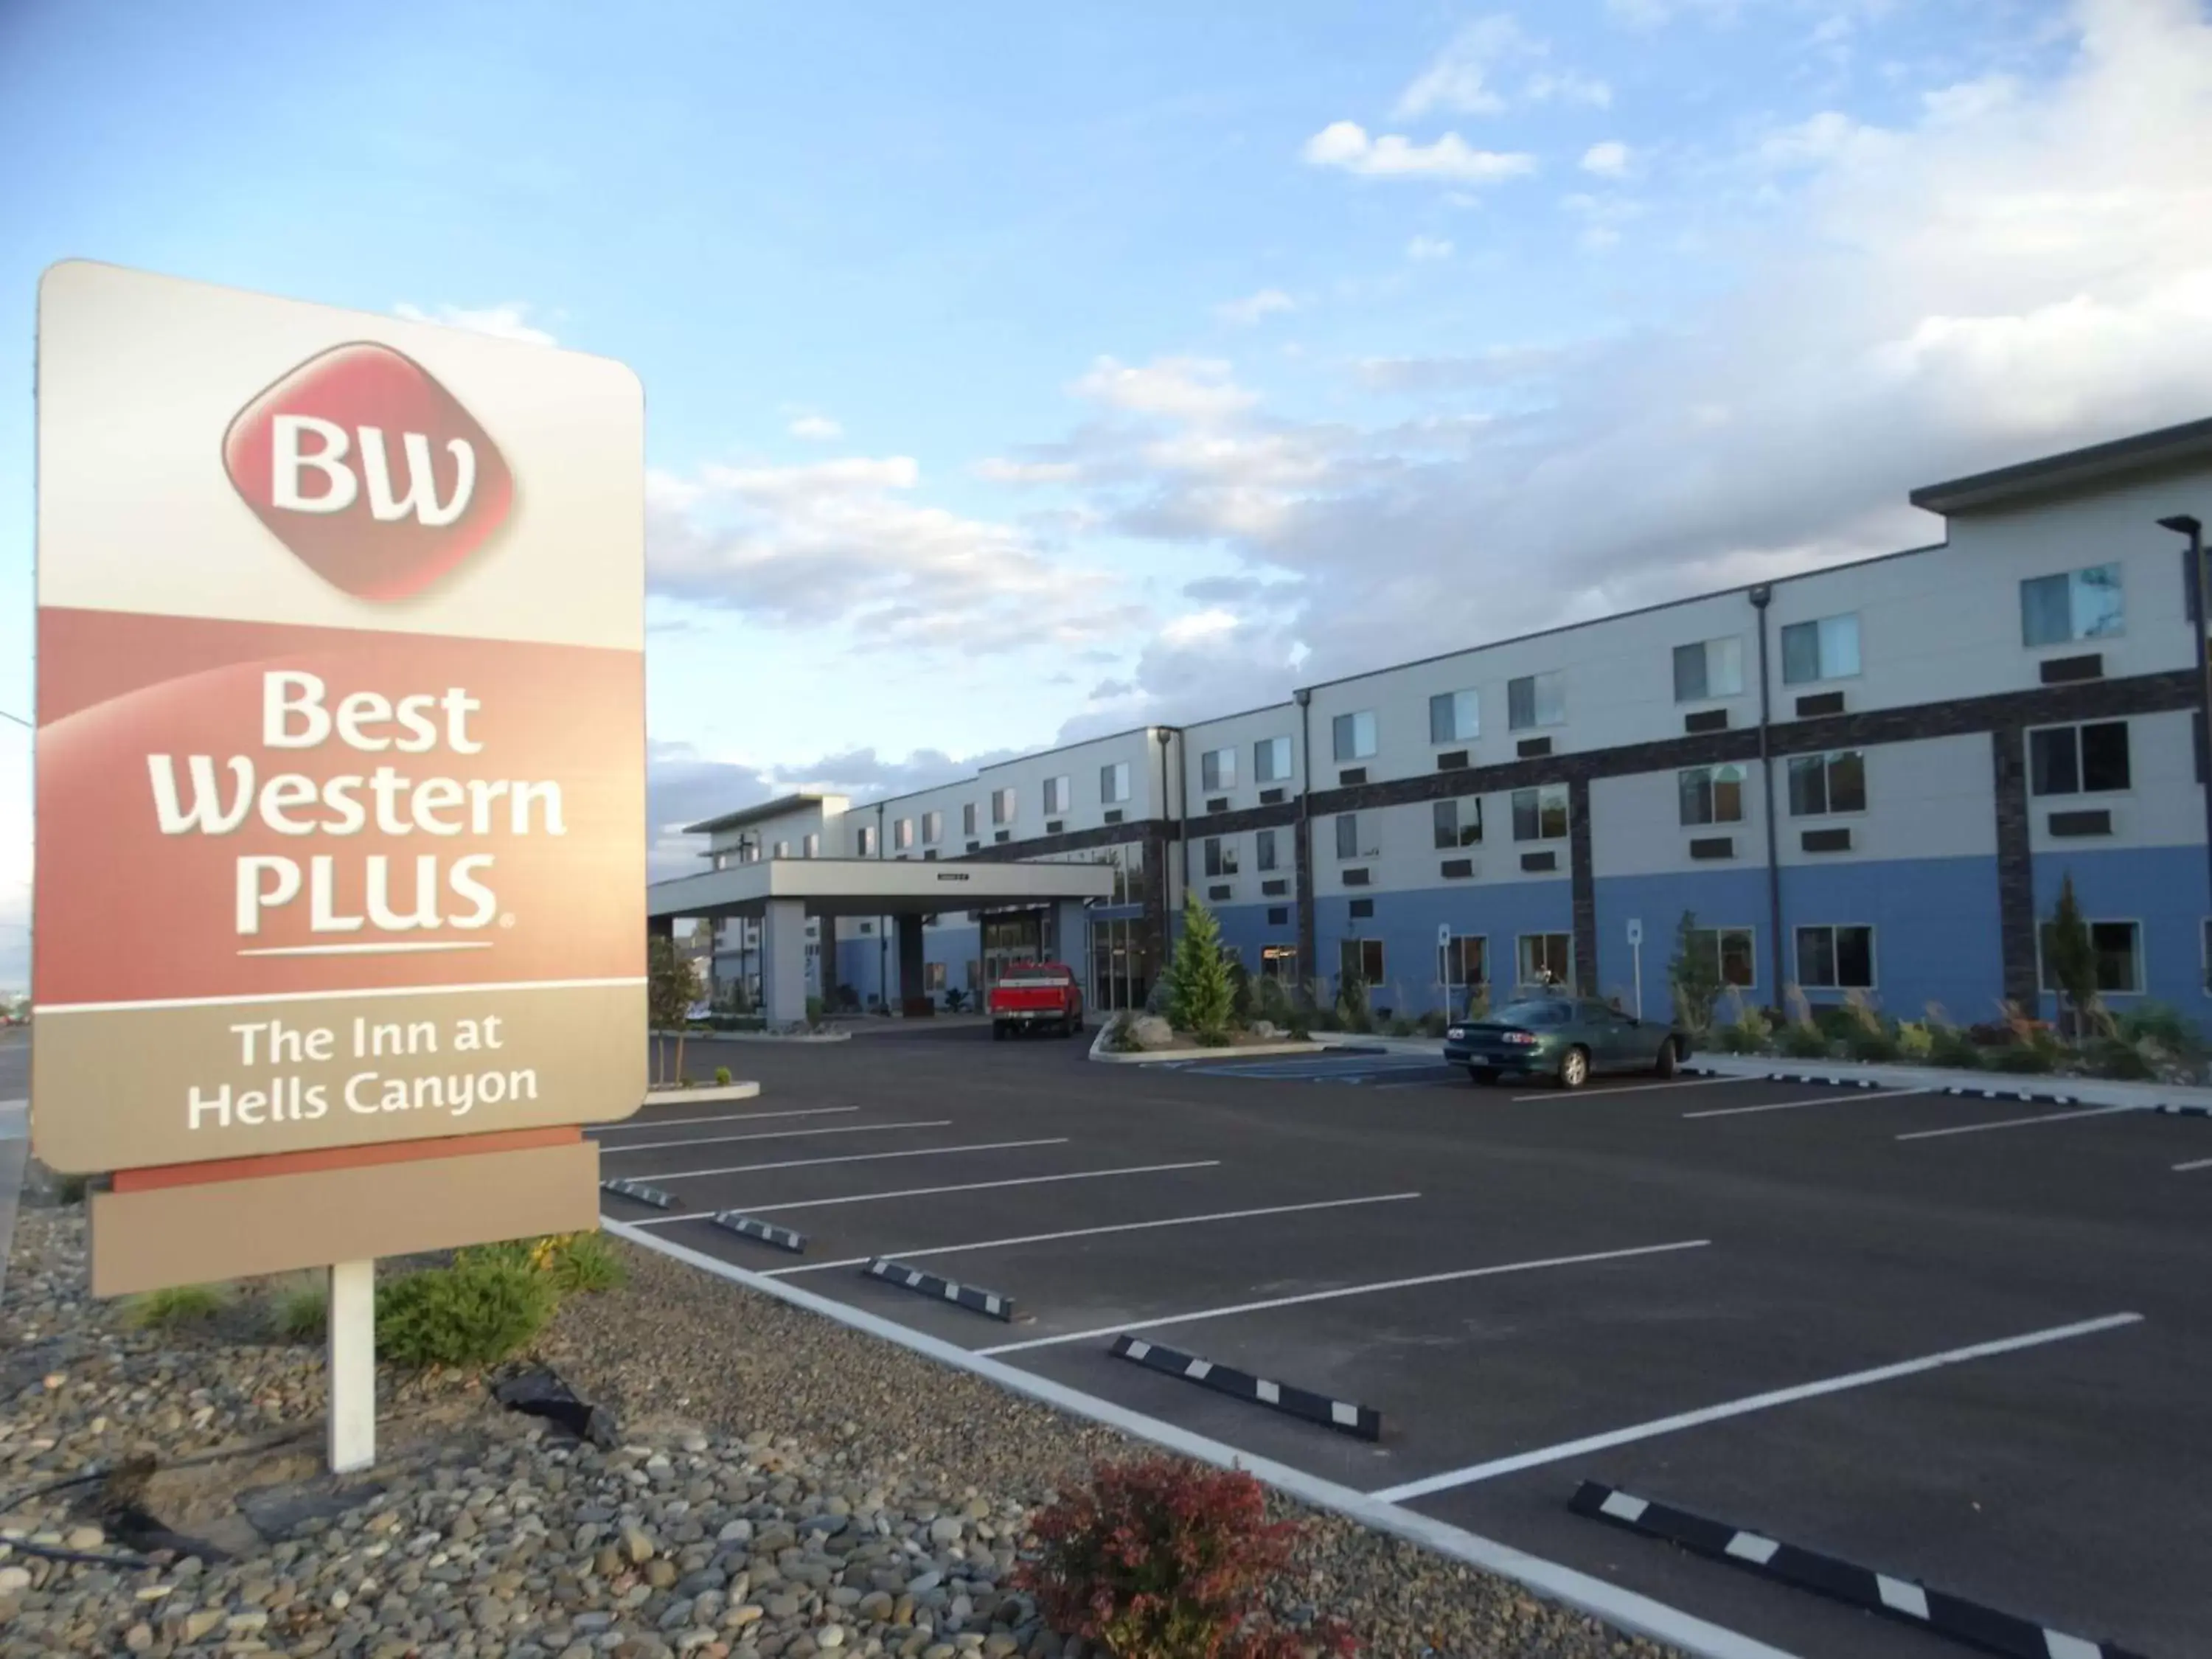 Property Building in Best Western Plus The Inn at Hells Canyon